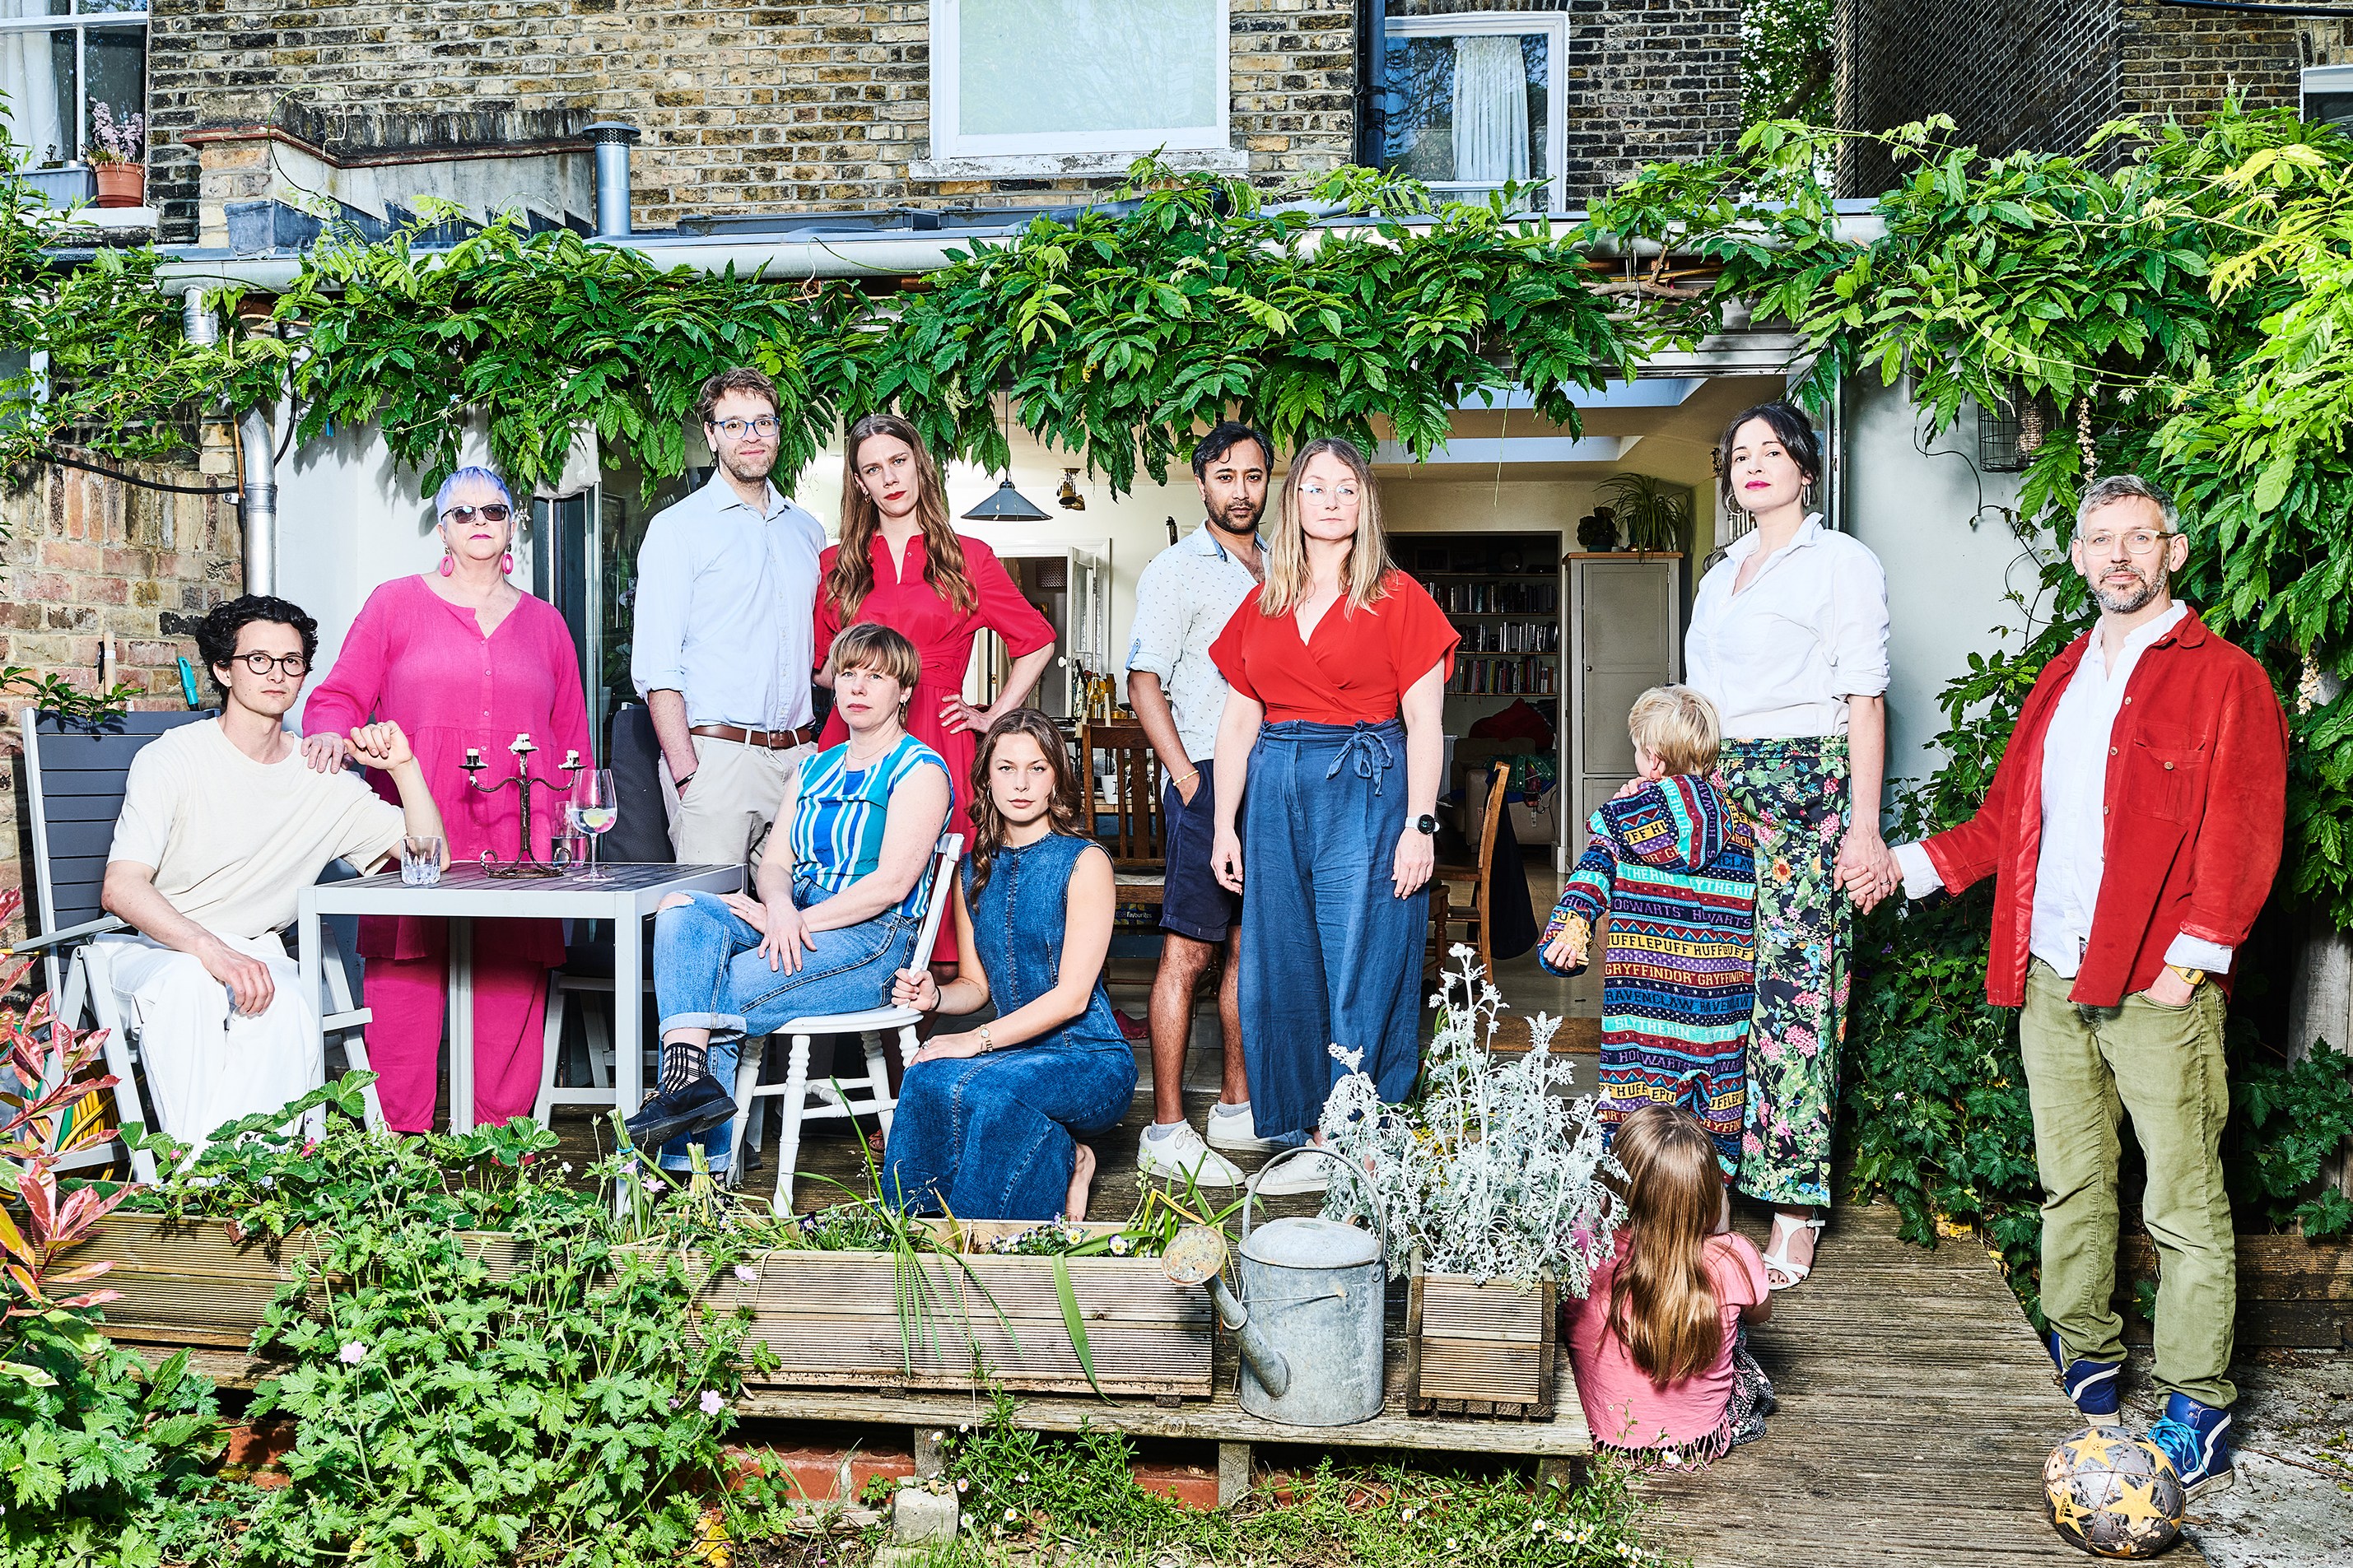 Elizabeth Oldfield, right, with her husband, Chris, and their two children, and co-owners Ramsey and Hatty El-Khazen (third and fourth from left), with honorary housemates, from left, Charlie Gilmour, Juliet Barclay, Erin Plunkett, Hannah Murray, Rhik Samadder and Leanne Sedin, at home in south London